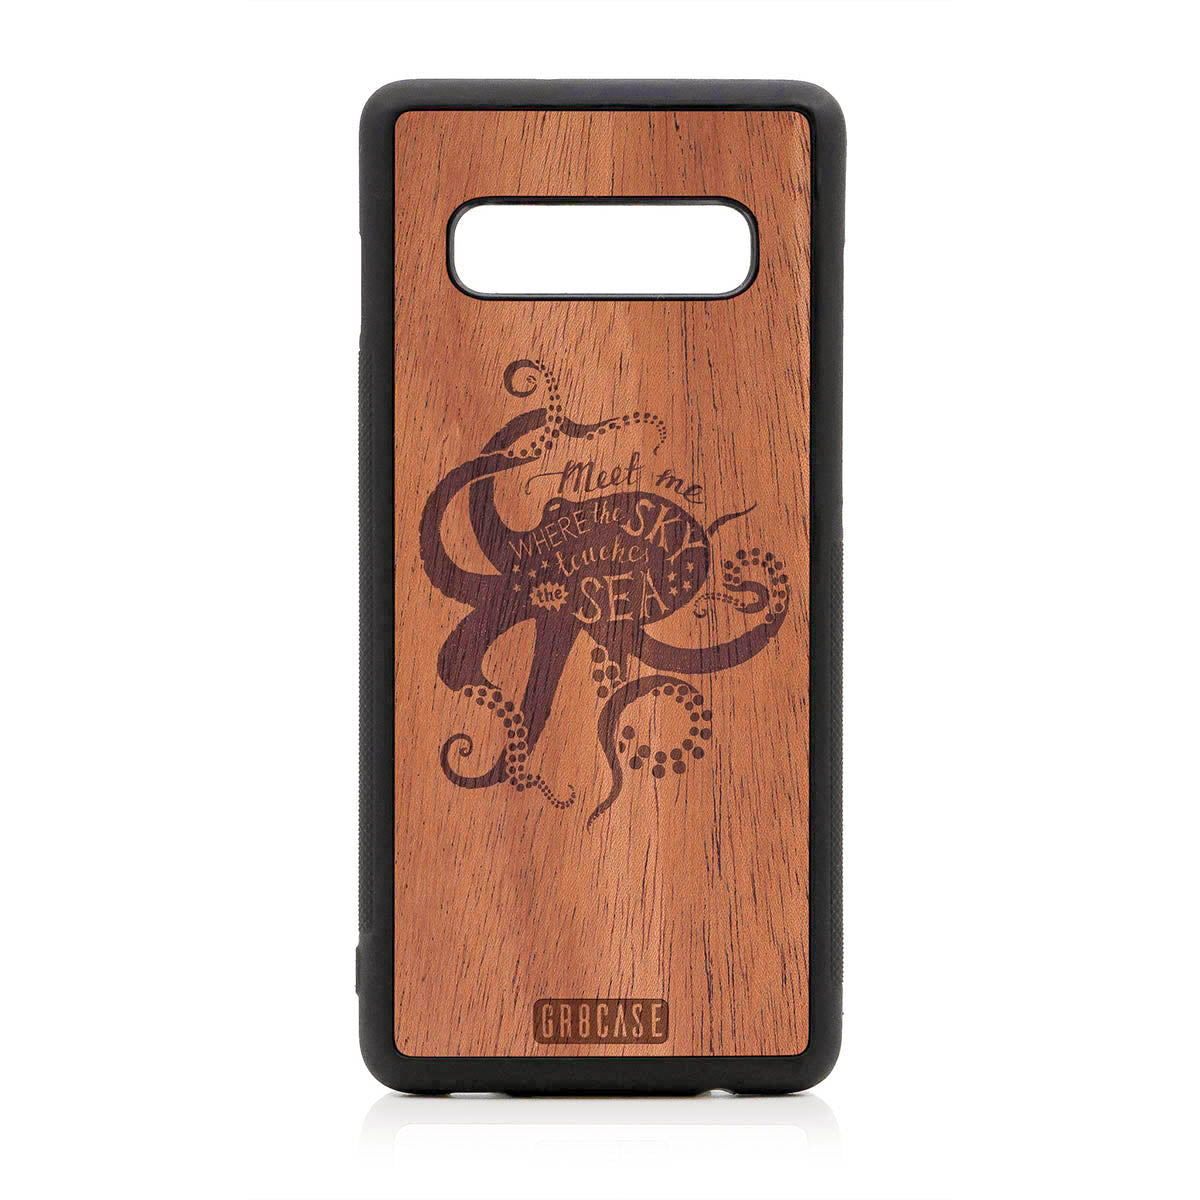 Meet Me Where The Sky Touches The Sea (Octopus) Design Wood Case For Samsung Galaxy S10 Plus